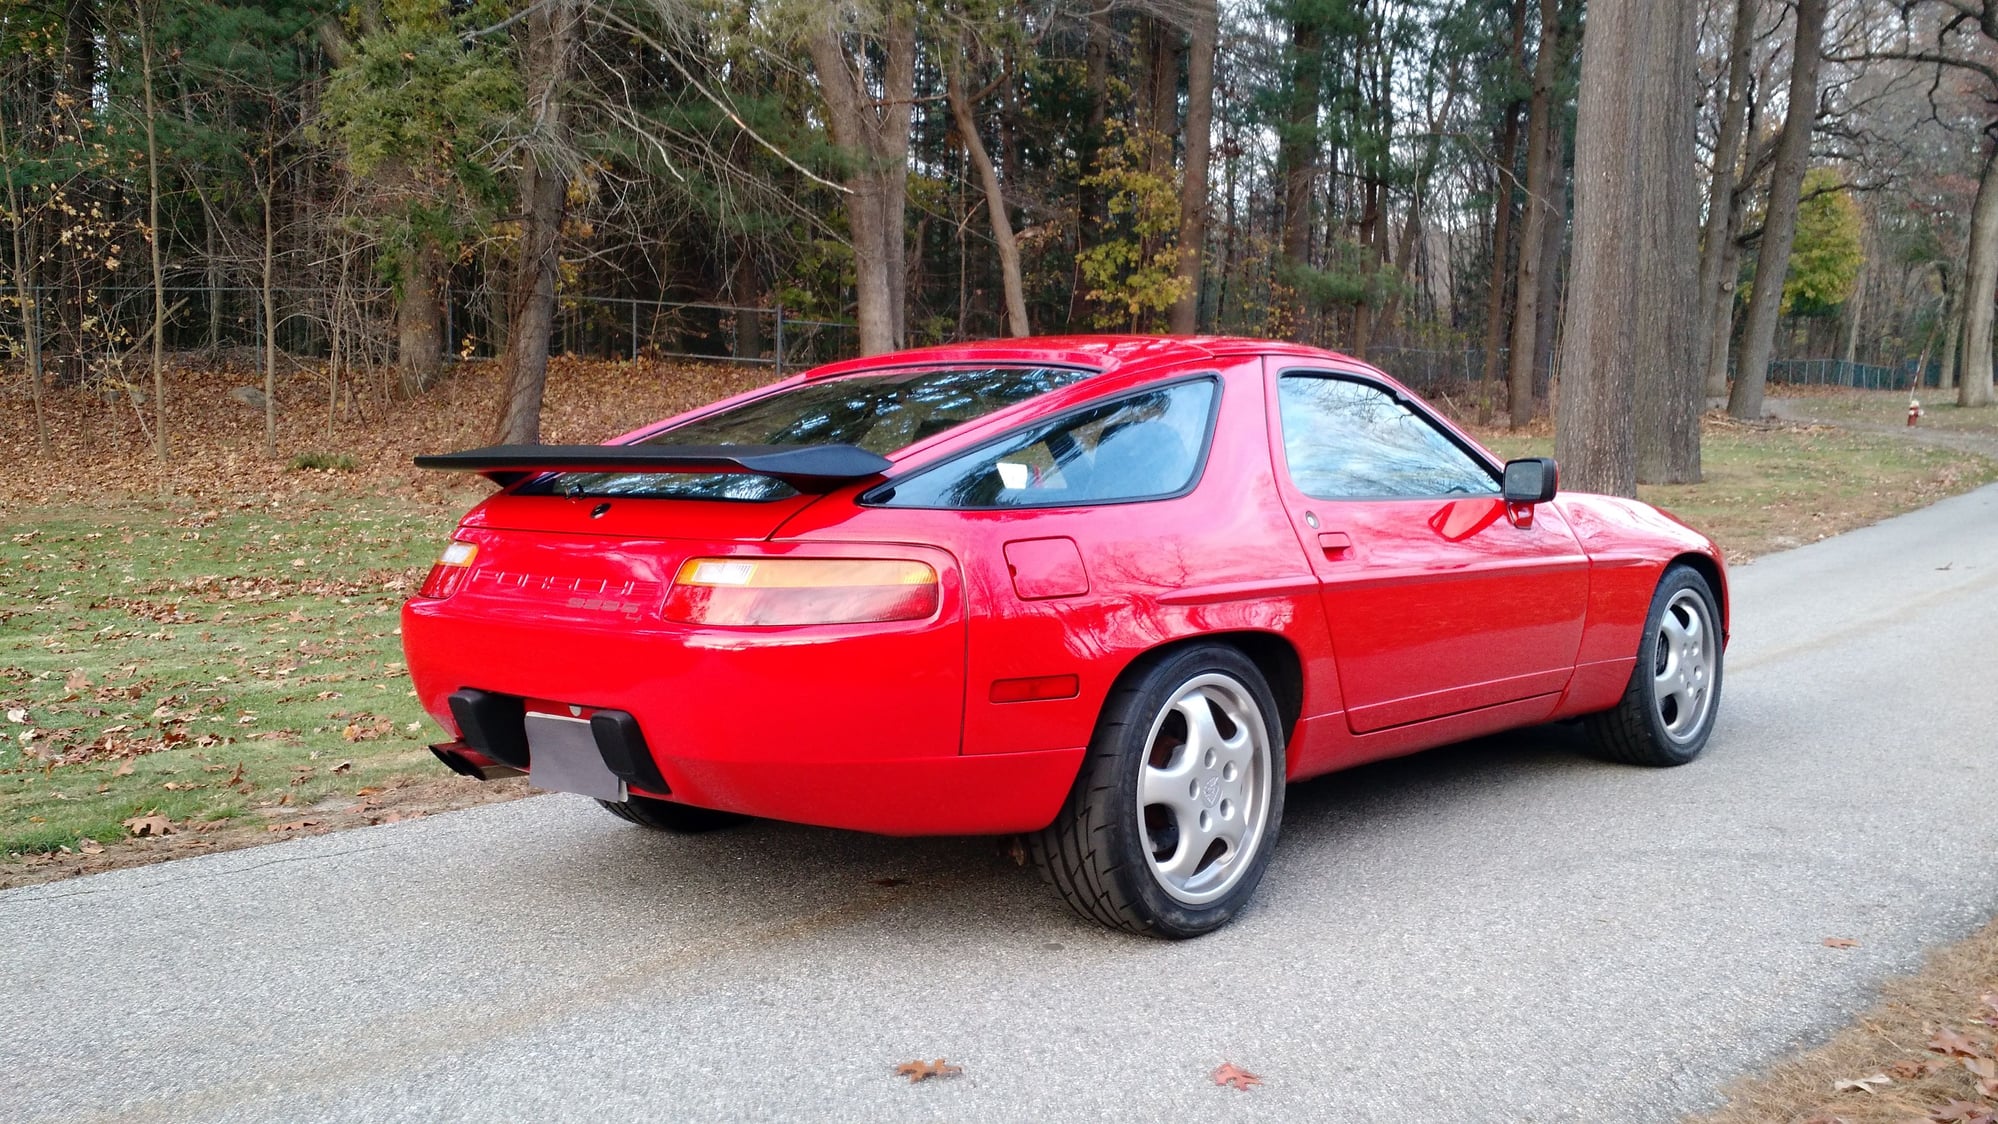 1987 Porsche 928 - 1987 Porsche 928 S4 5spd Manual - Used - VIN WP0JB0924HS860292 - 50,942 Miles - 8 cyl - 2WD - Manual - Coupe - Red - Bedford, MA 01730, United States